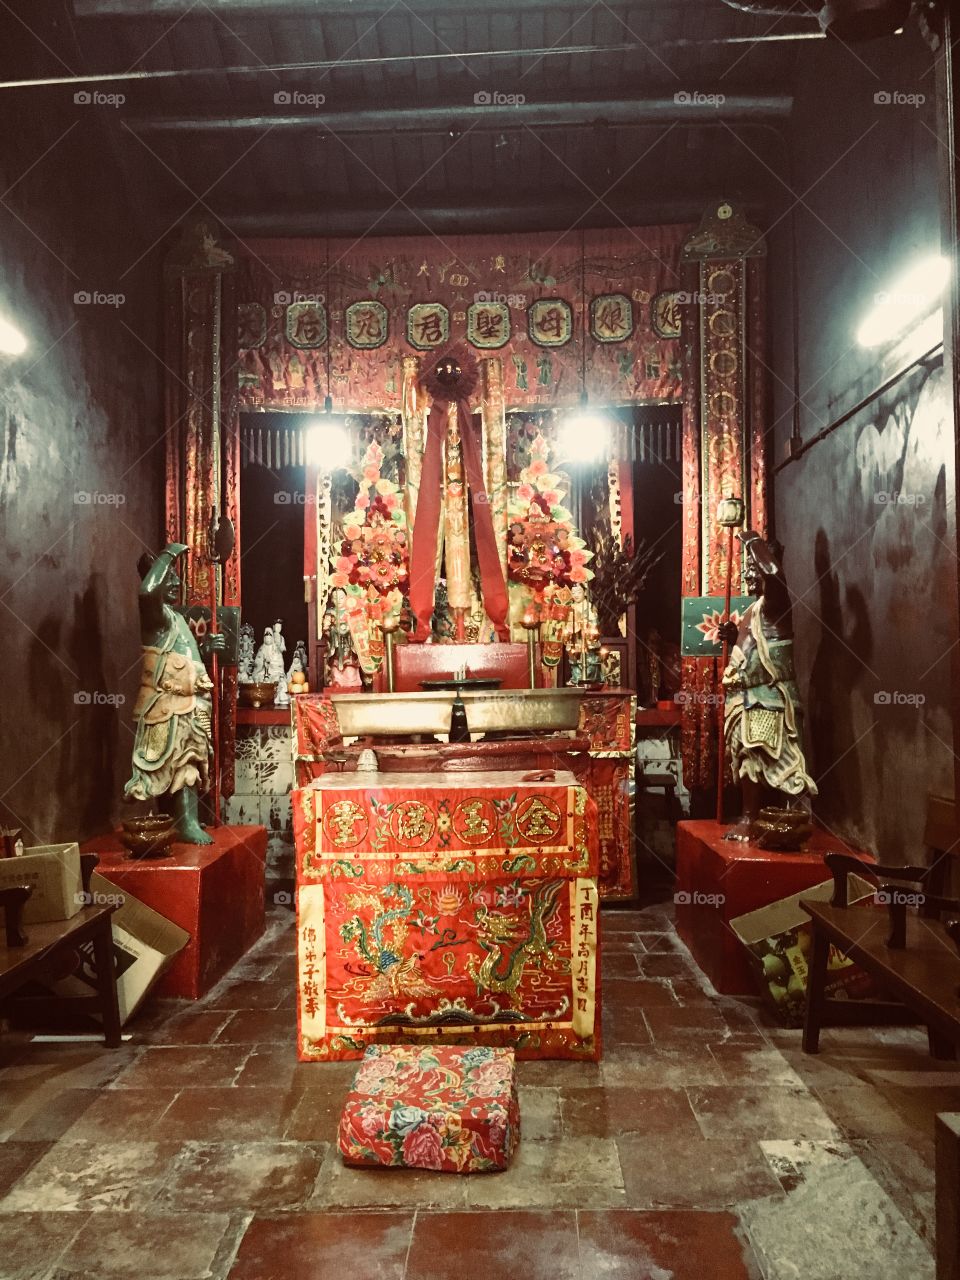 Hong Kong. Amazing place filled w wealth, business, luxury, and modernization, but also holding on tight to history, culture, spirituality, and grit. This is a shrine in Lan Tai